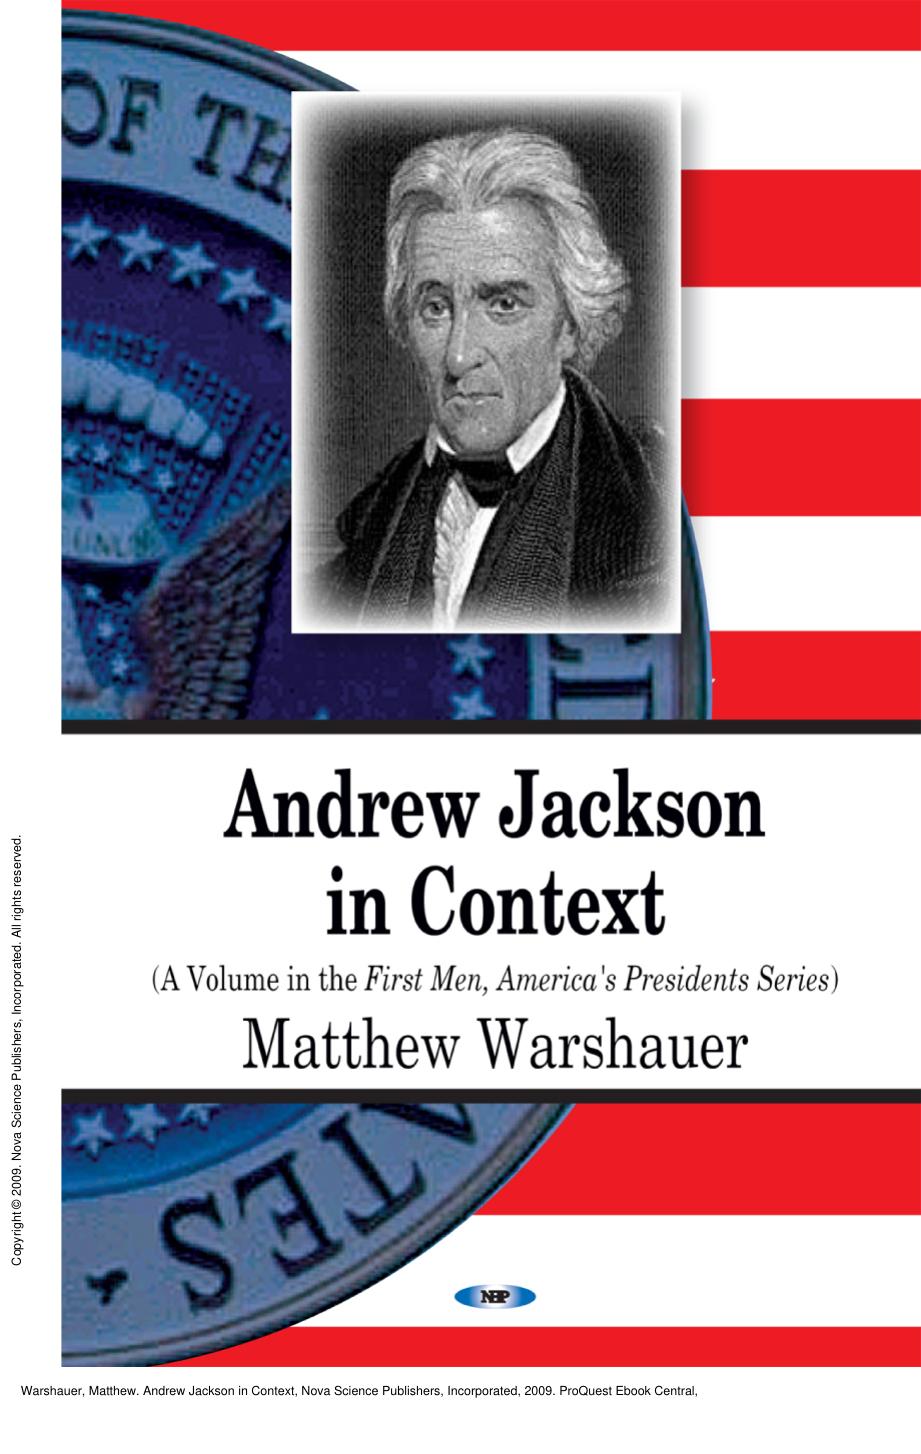 Andrew Jackson in Context by Matthew Warshauer